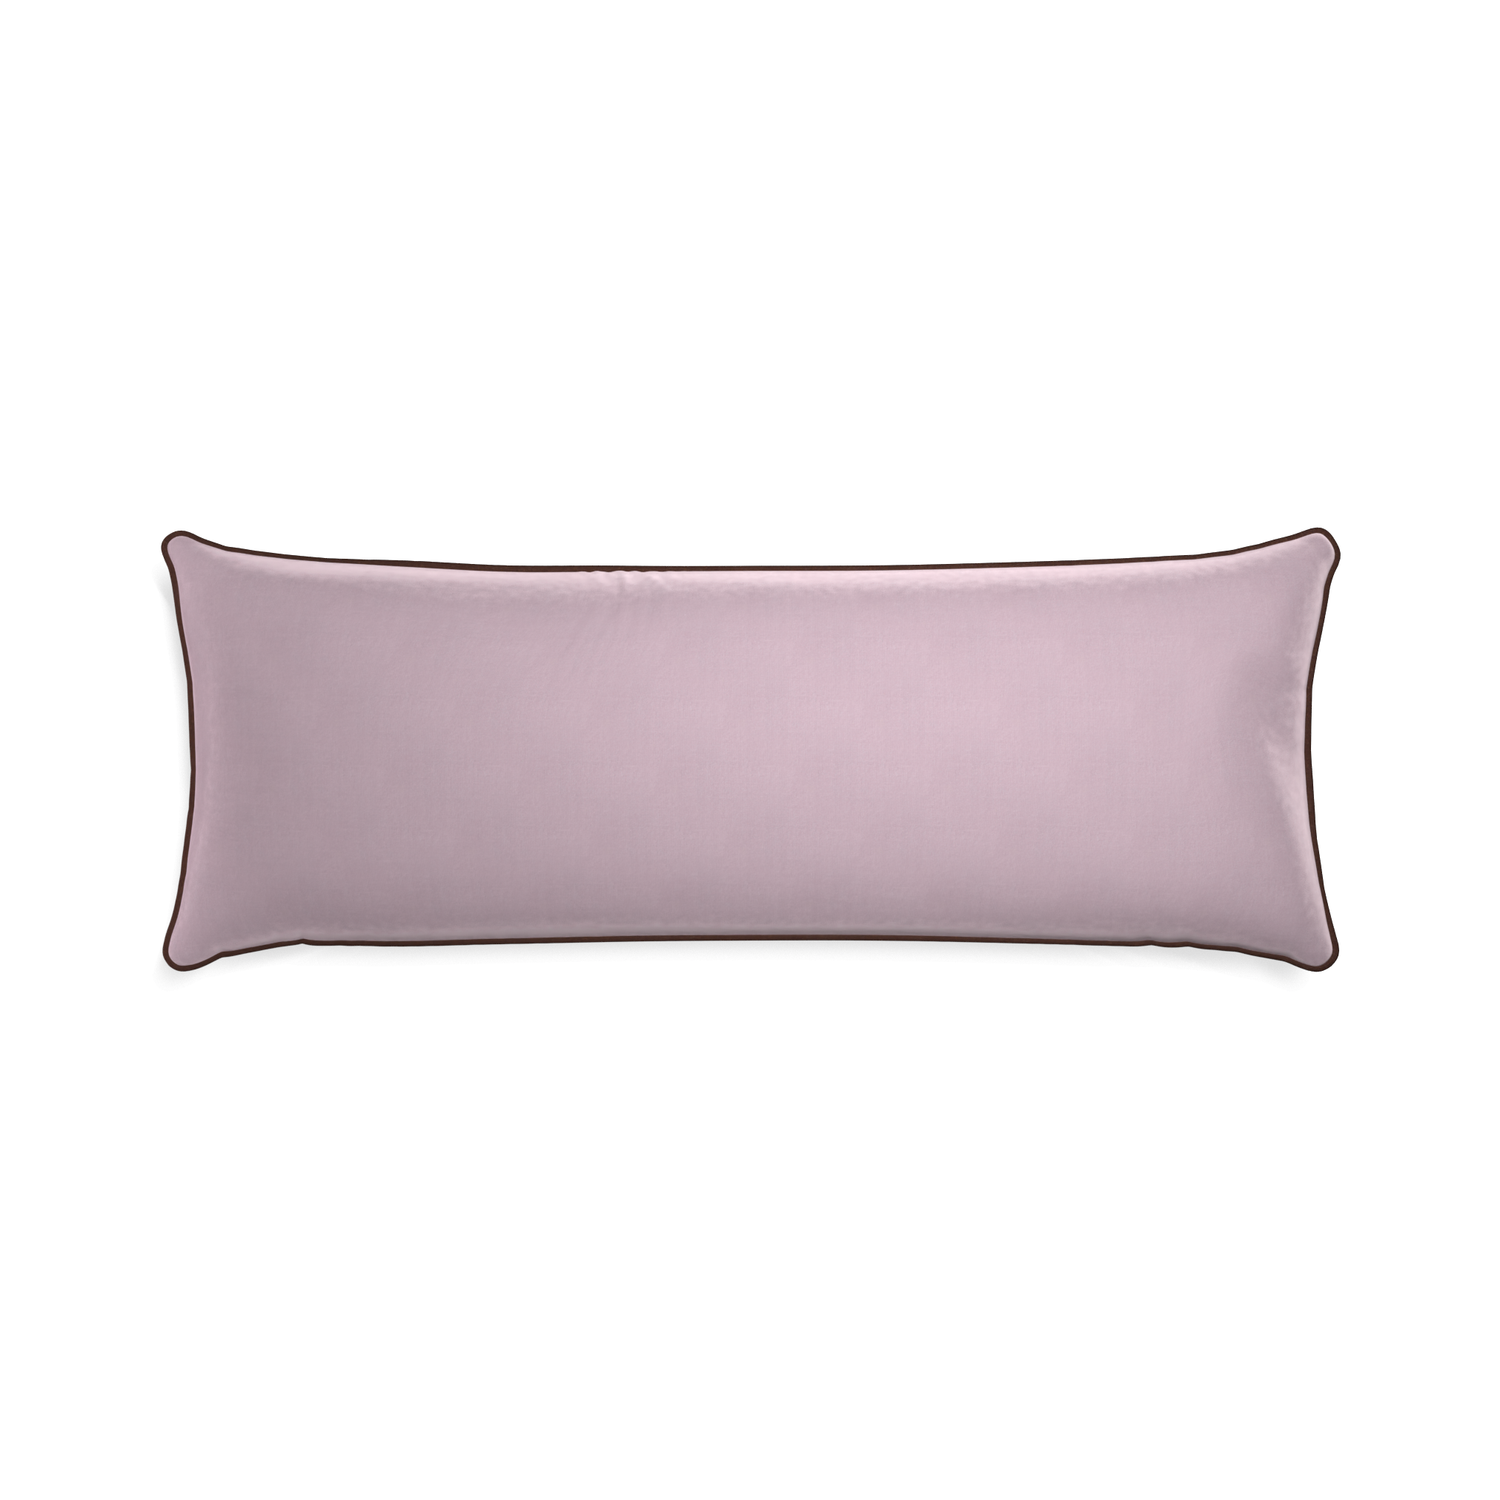 Xl-lumbar lilac velvet custom lilacpillow with w piping on white background